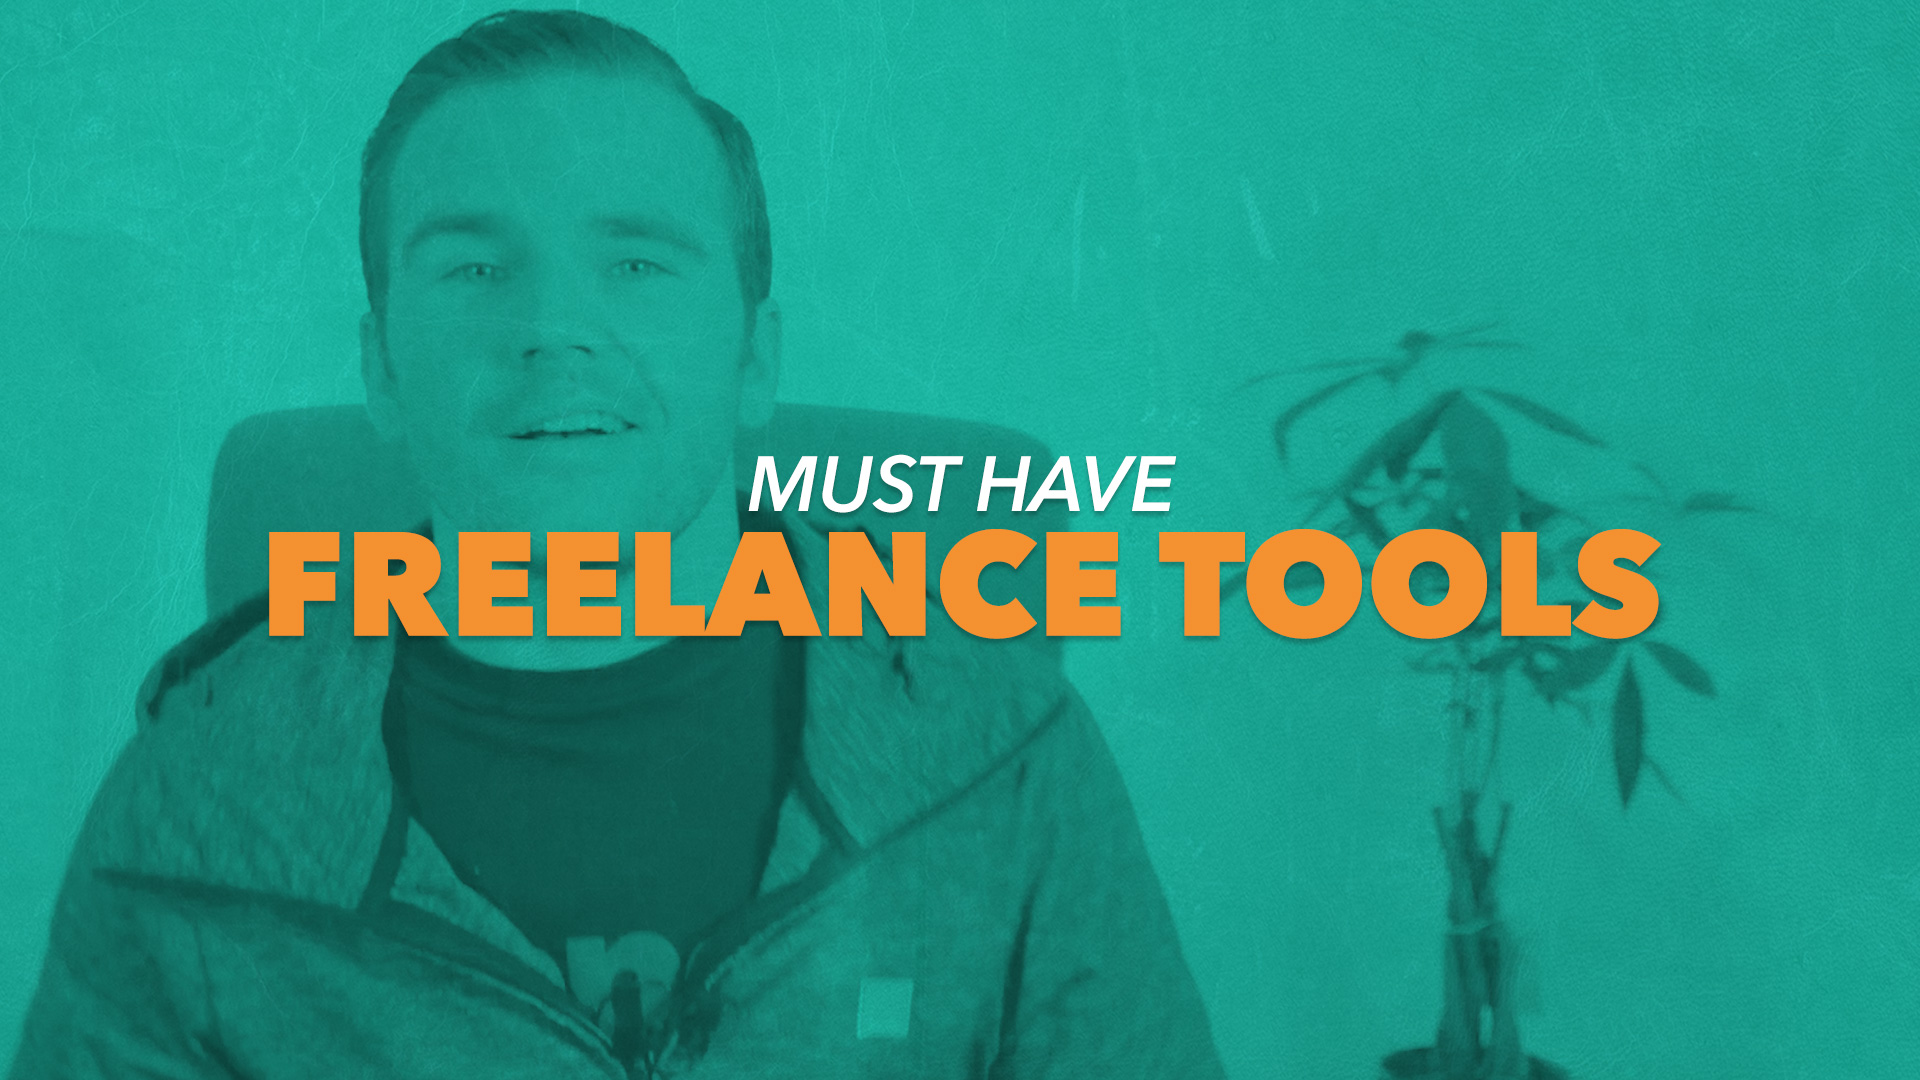 Tools for freelancers